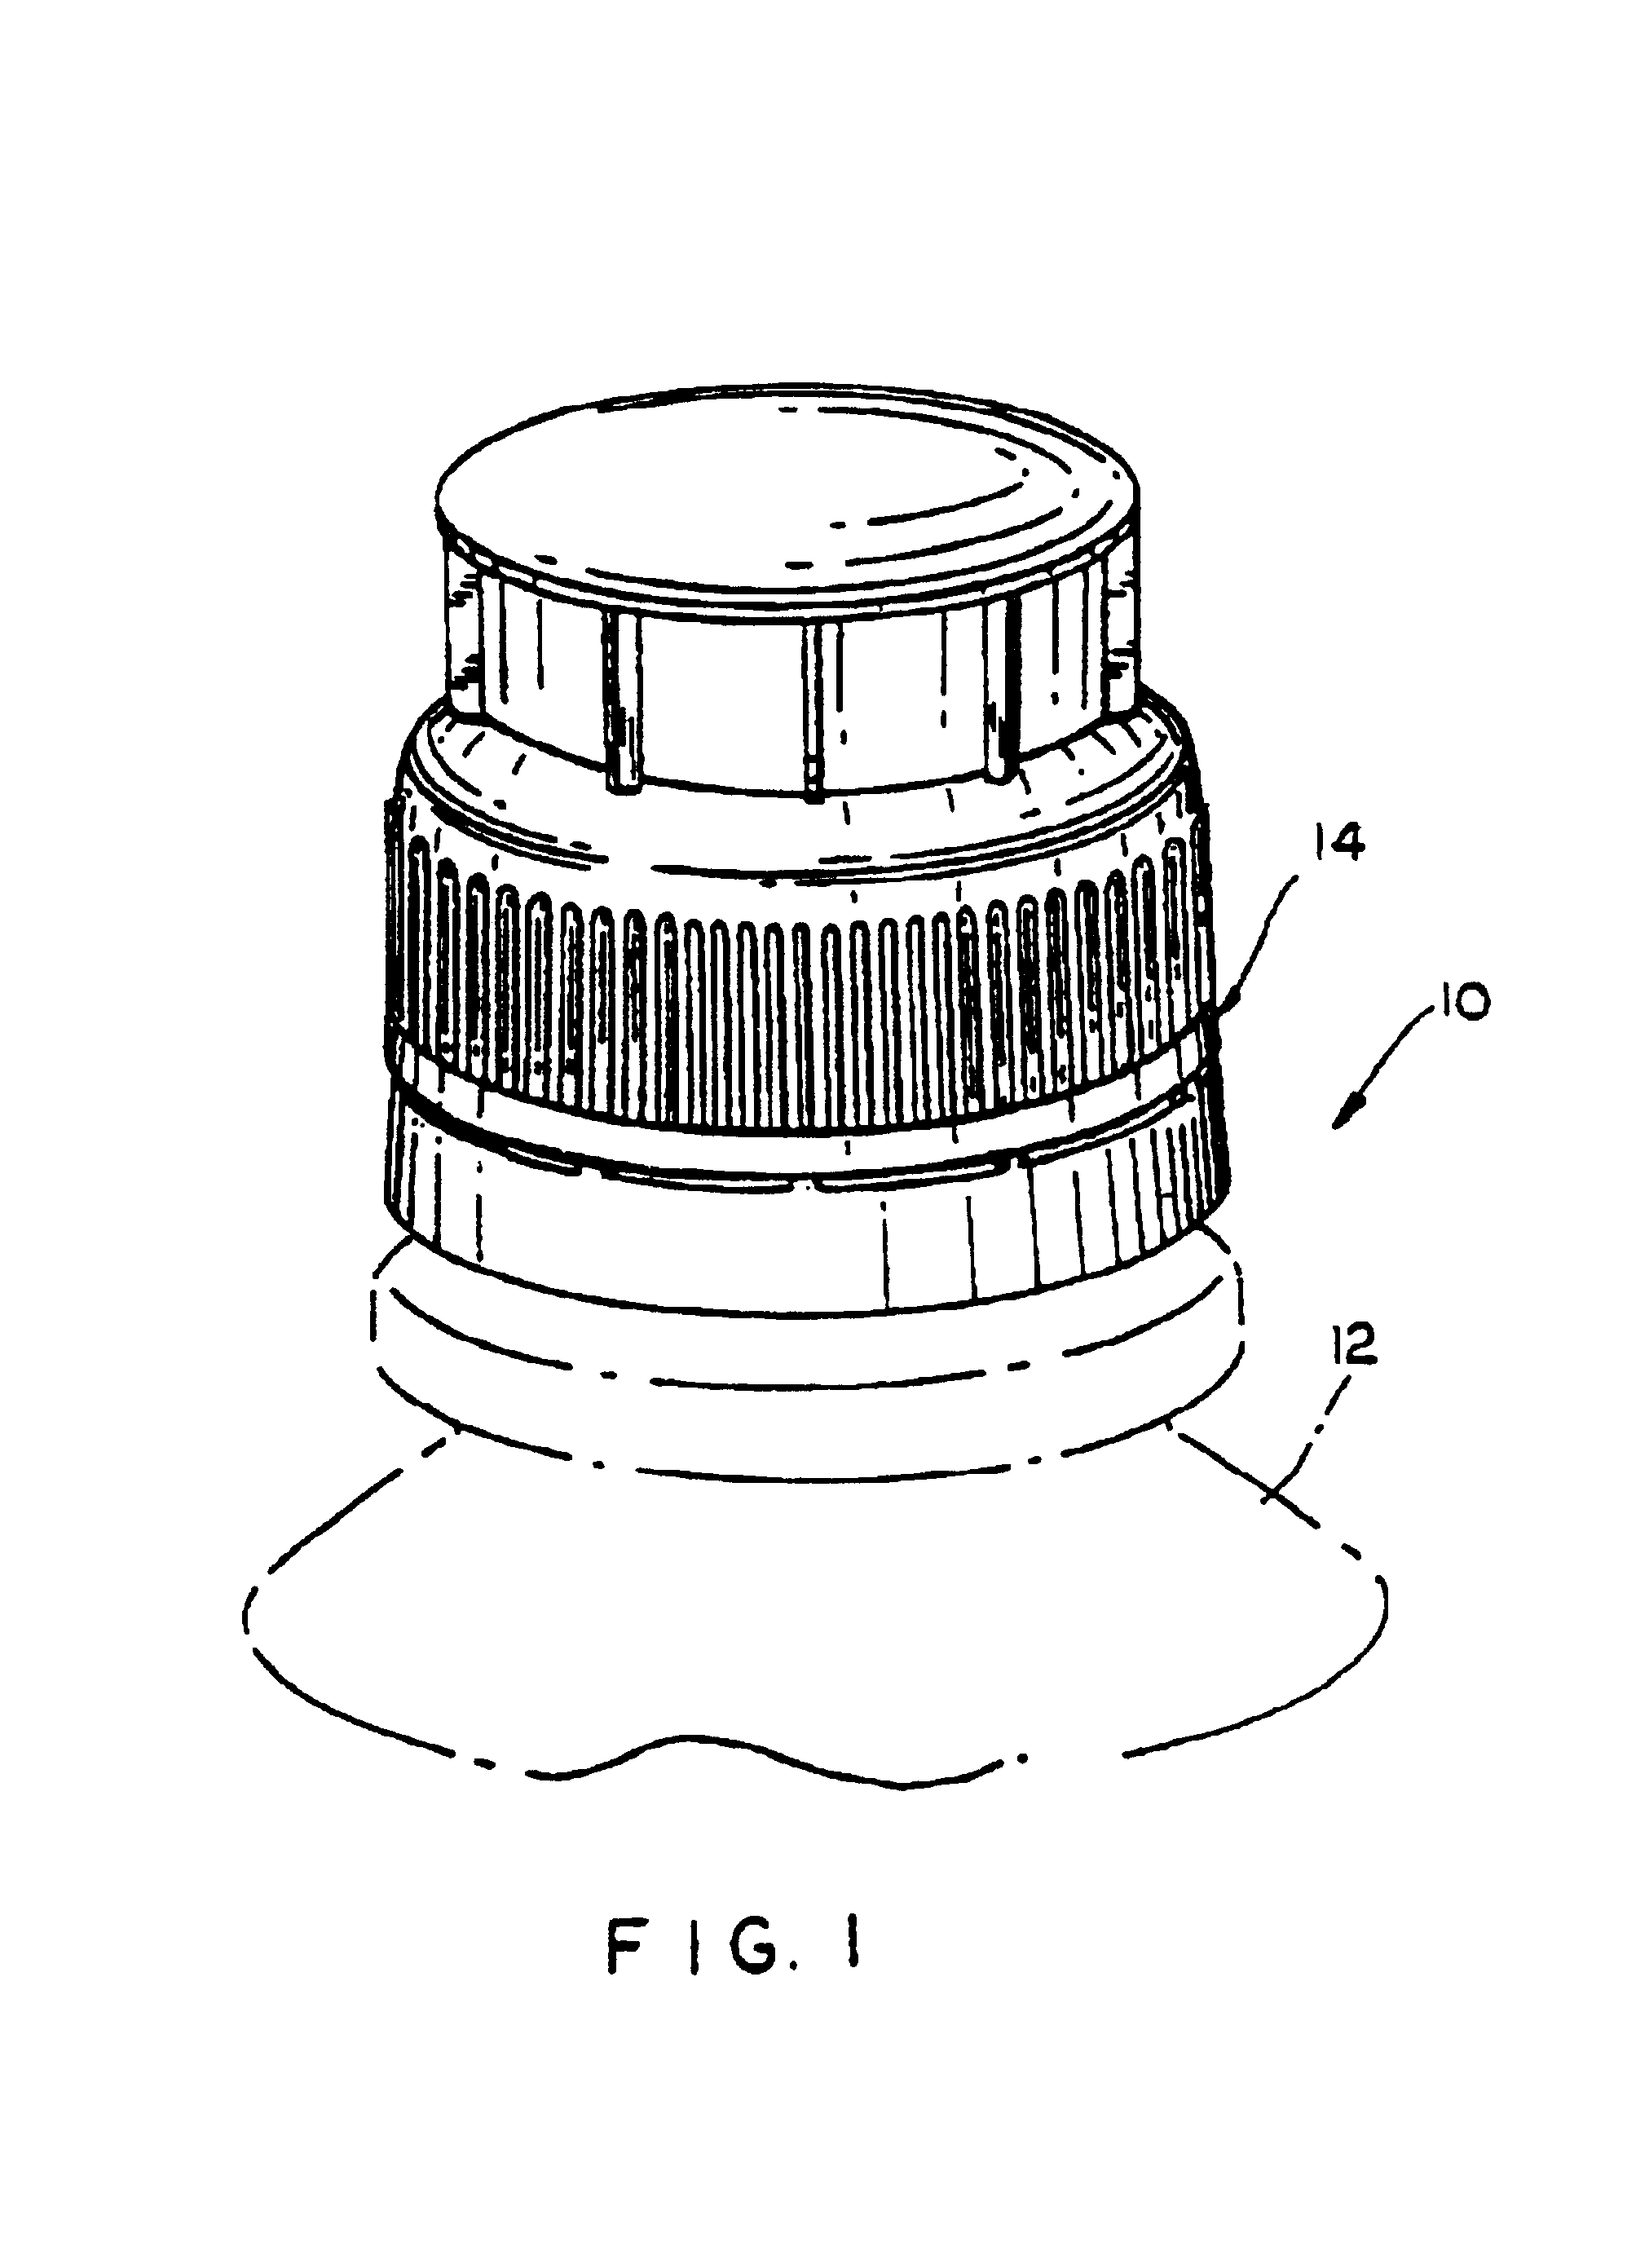 Cover for dispensing closure with pressure actuated valve